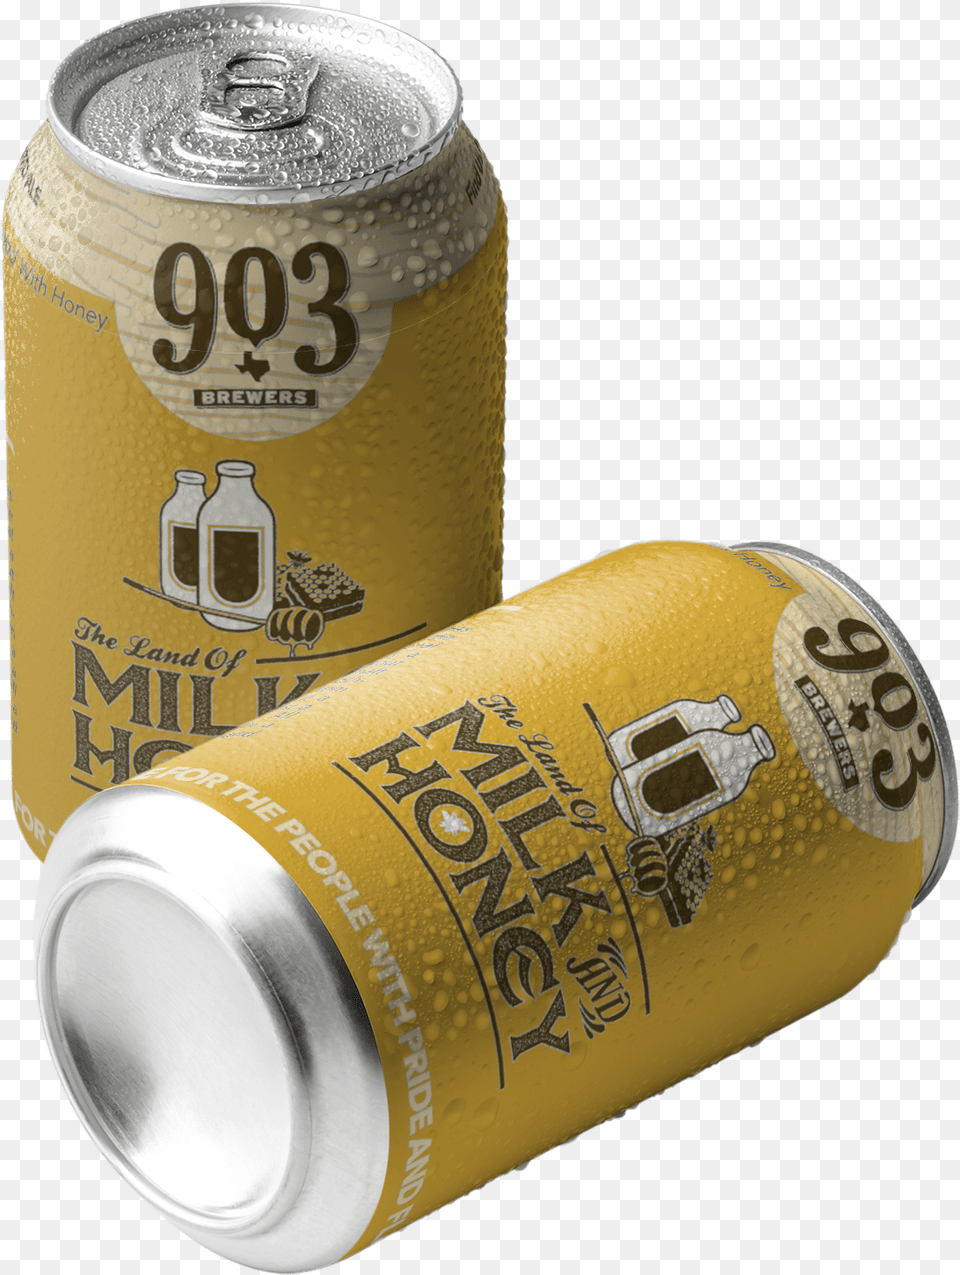 Land Of Milk And Honey Beer, Alcohol, Beverage, Tin, Can Png